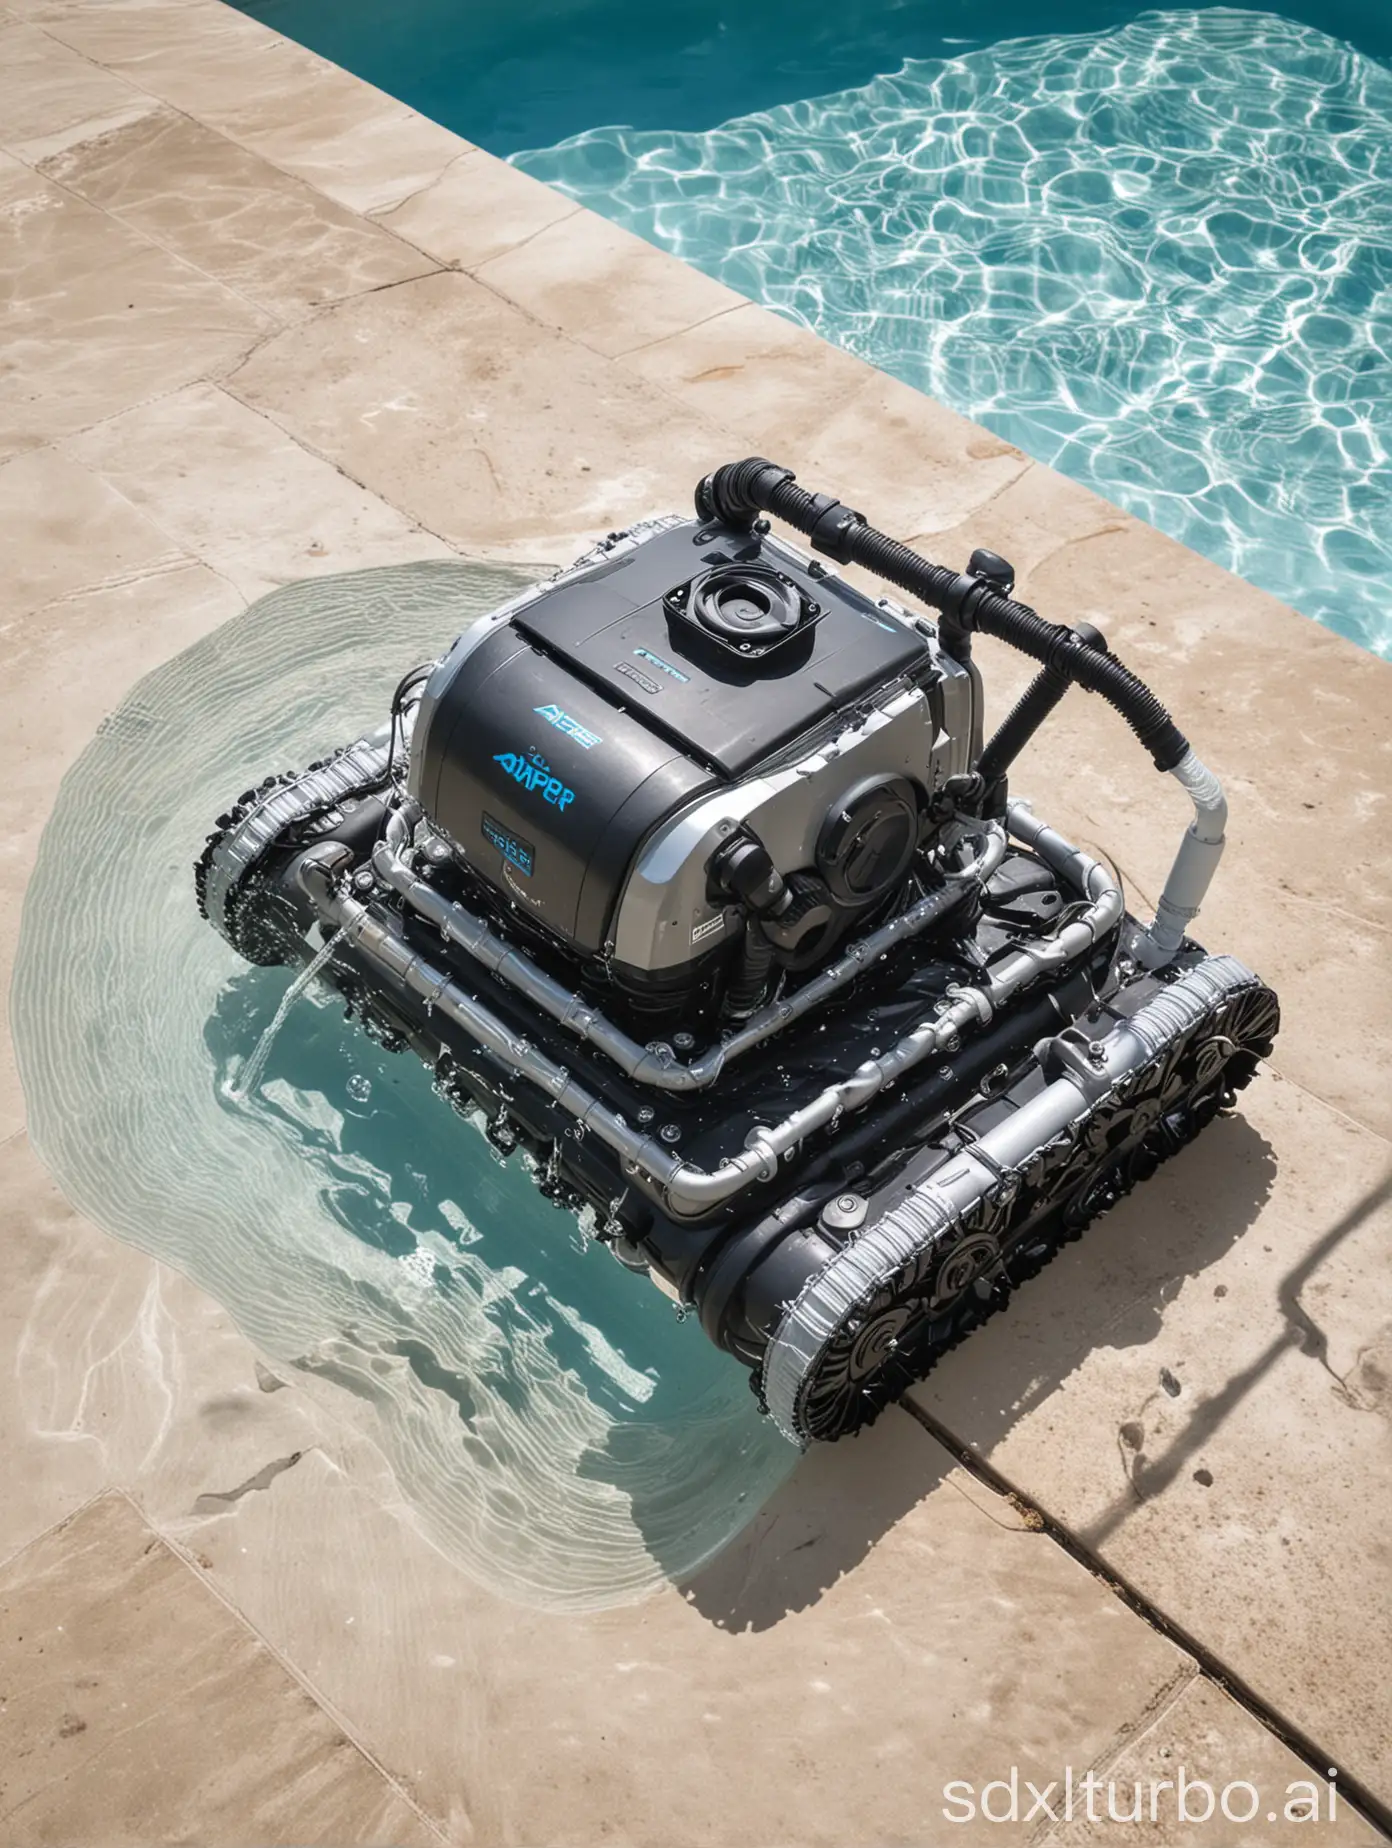 A robotic pool cleaner, the Aiper Scuba S1, cleaning a swimming pool. The pool cleaner is shown floating in the pool, with its suction hoses attached to the pool's filtration system. The pool cleaner is cleaning the pool floor, and the water is crystal clear.